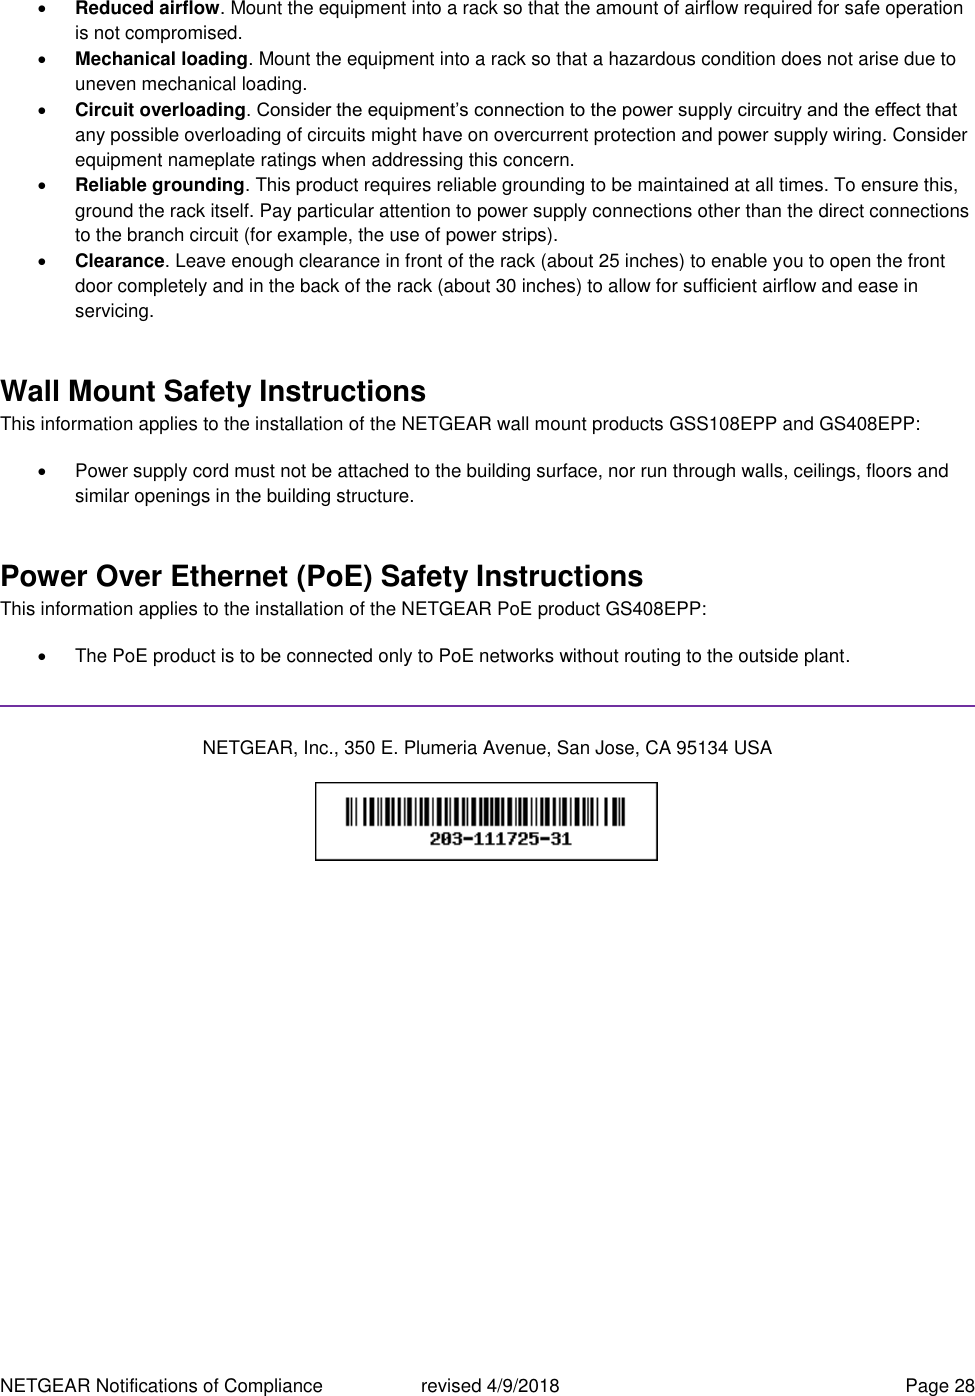 NETGEAR Notifications of Compliance    revised 4/9/2018  Page 28  Reduced airflow. Mount the equipment into a rack so that the amount of airflow required for safe operation is not compromised.  Mechanical loading. Mount the equipment into a rack so that a hazardous condition does not arise due to uneven mechanical loading.  Circuit overloading. Consider the equipment’s connection to the power supply circuitry and the effect that any possible overloading of circuits might have on overcurrent protection and power supply wiring. Consider equipment nameplate ratings when addressing this concern.  Reliable grounding. This product requires reliable grounding to be maintained at all times. To ensure this, ground the rack itself. Pay particular attention to power supply connections other than the direct connections to the branch circuit (for example, the use of power strips).  Clearance. Leave enough clearance in front of the rack (about 25 inches) to enable you to open the front door completely and in the back of the rack (about 30 inches) to allow for sufficient airflow and ease in servicing. Wall Mount Safety Instructions This information applies to the installation of the NETGEAR wall mount products GSS108EPP and GS408EPP:   Power supply cord must not be attached to the building surface, nor run through walls, ceilings, floors and similar openings in the building structure. Power Over Ethernet (PoE) Safety Instructions This information applies to the installation of the NETGEAR PoE product GS408EPP:   The PoE product is to be connected only to PoE networks without routing to the outside plant.  NETGEAR, Inc., 350 E. Plumeria Avenue, San Jose, CA 95134 USA    